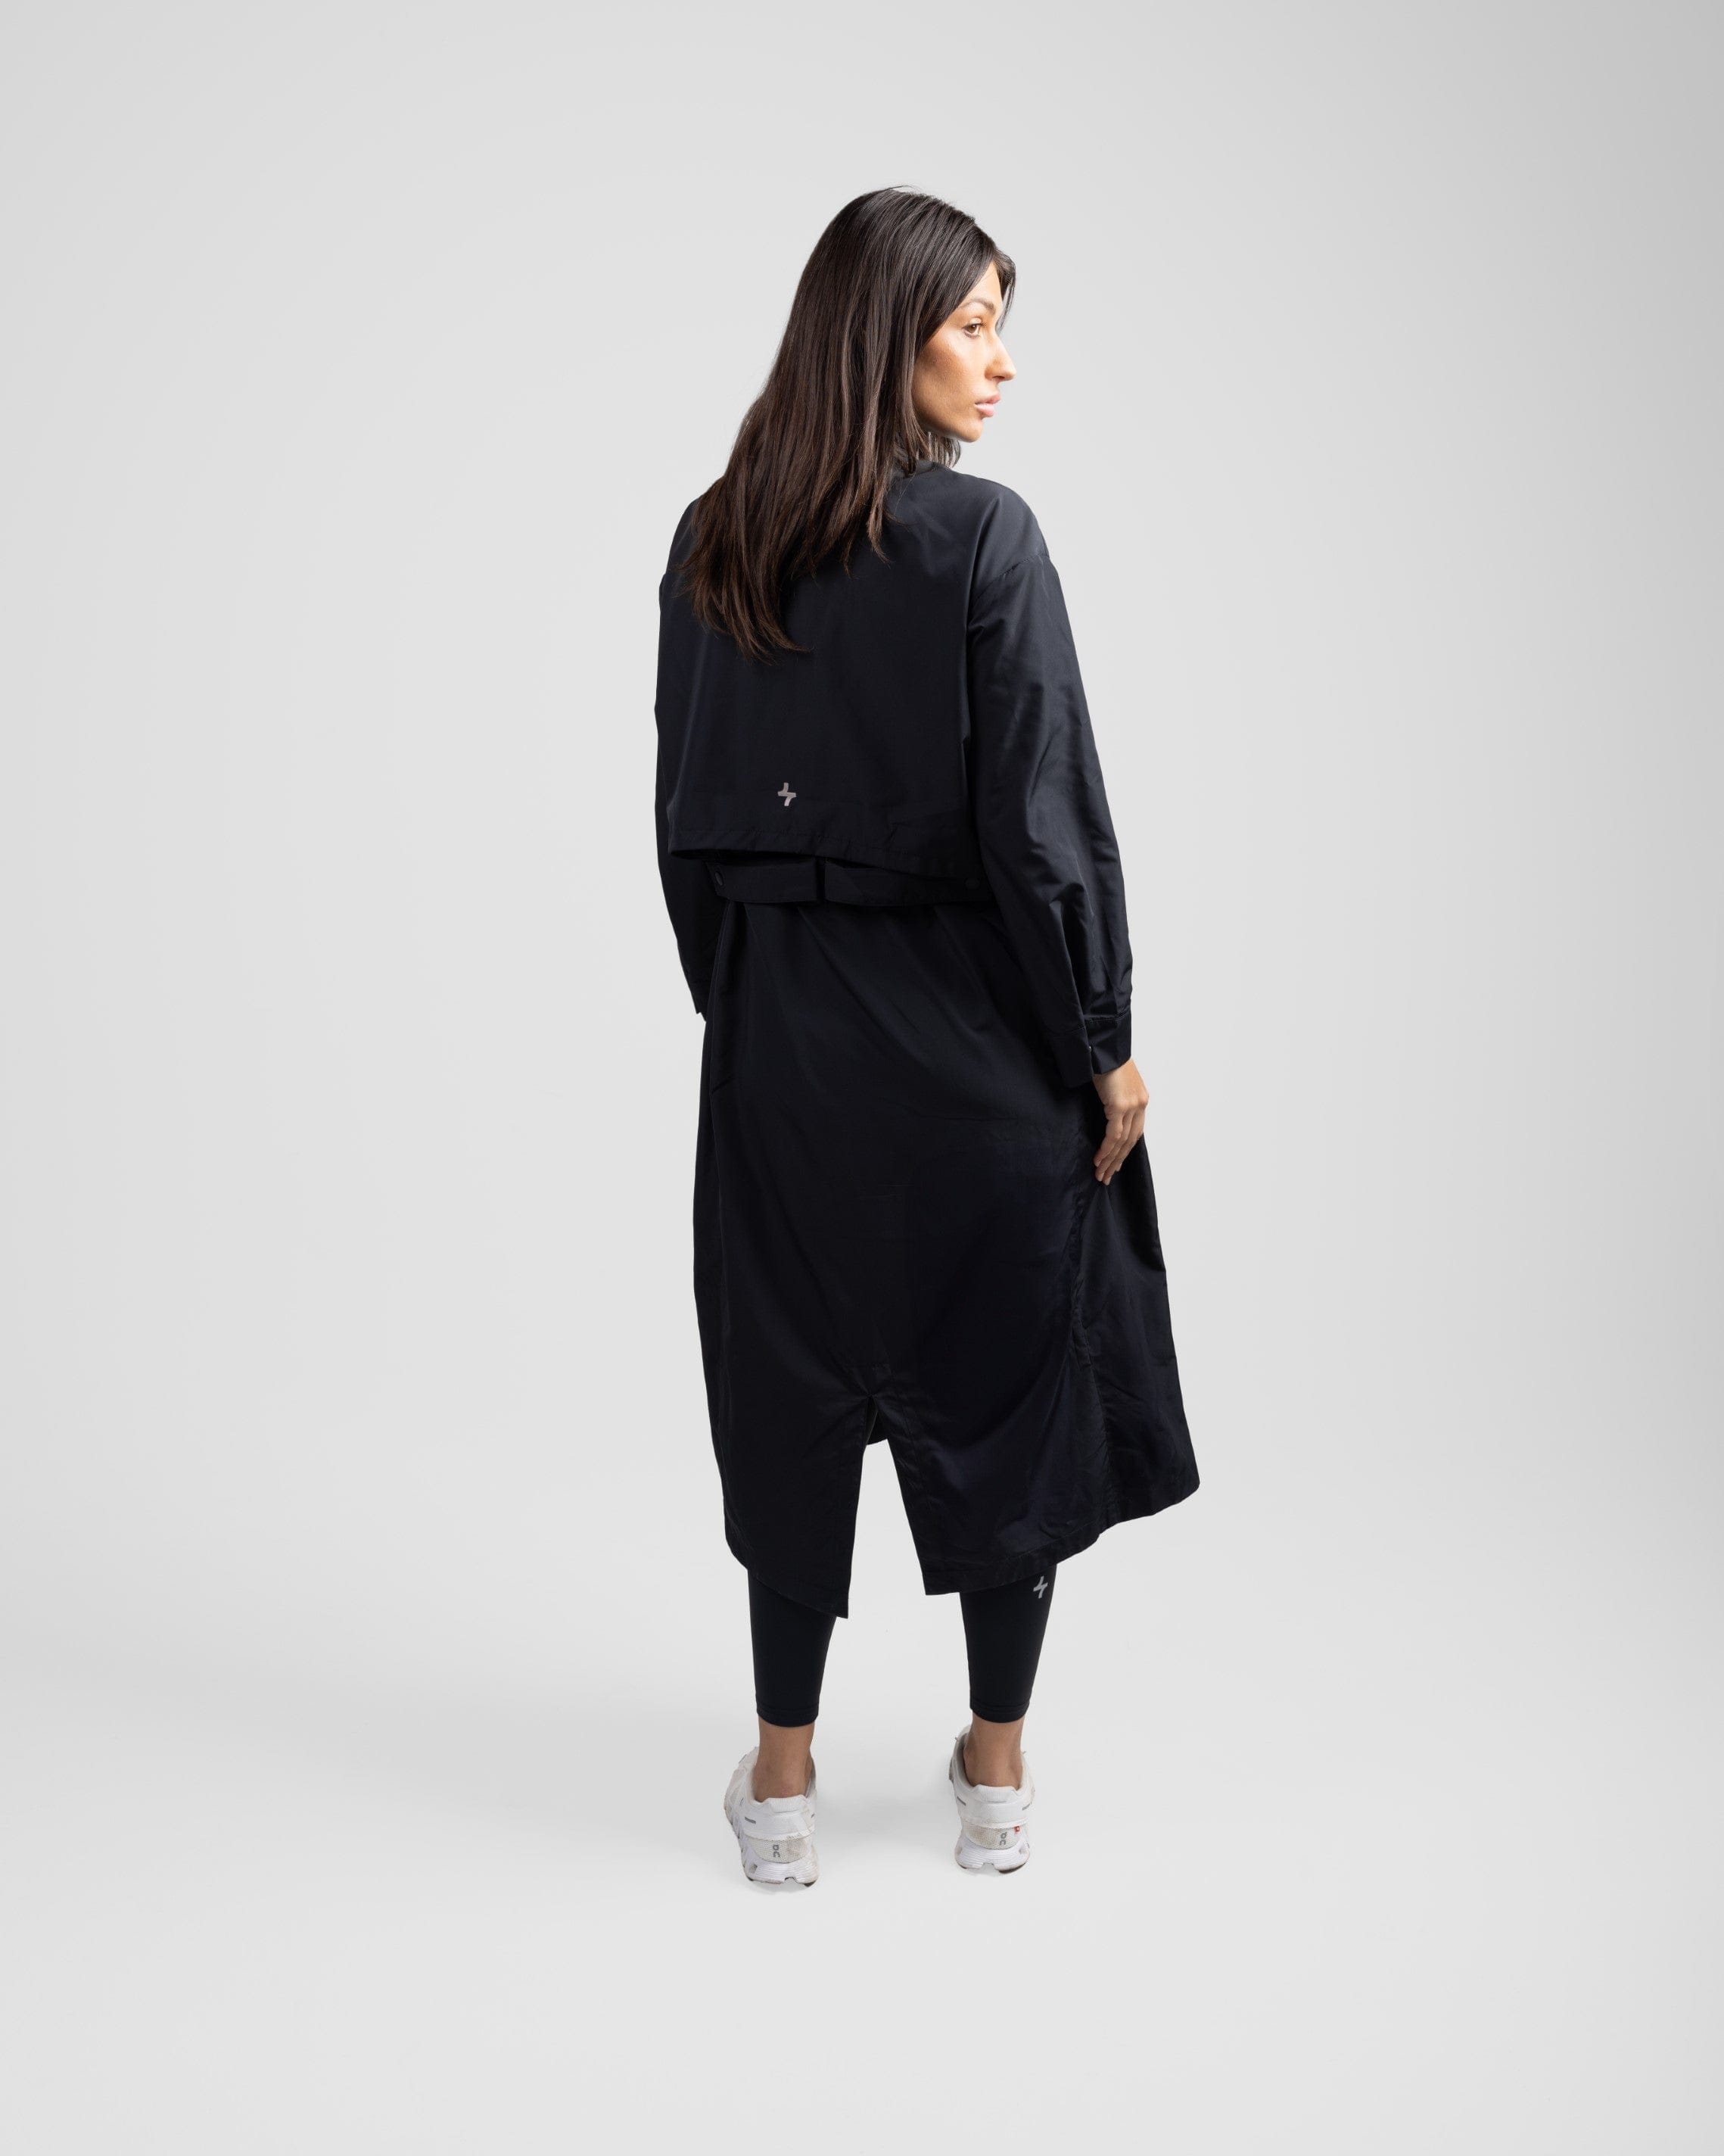 A model viewed from behind, turns her head to her left, wearing a stylish black modest MAK LIGHT PARKA by Qynda with a dual-direction zipper and sneakers, standing against a light gray background.